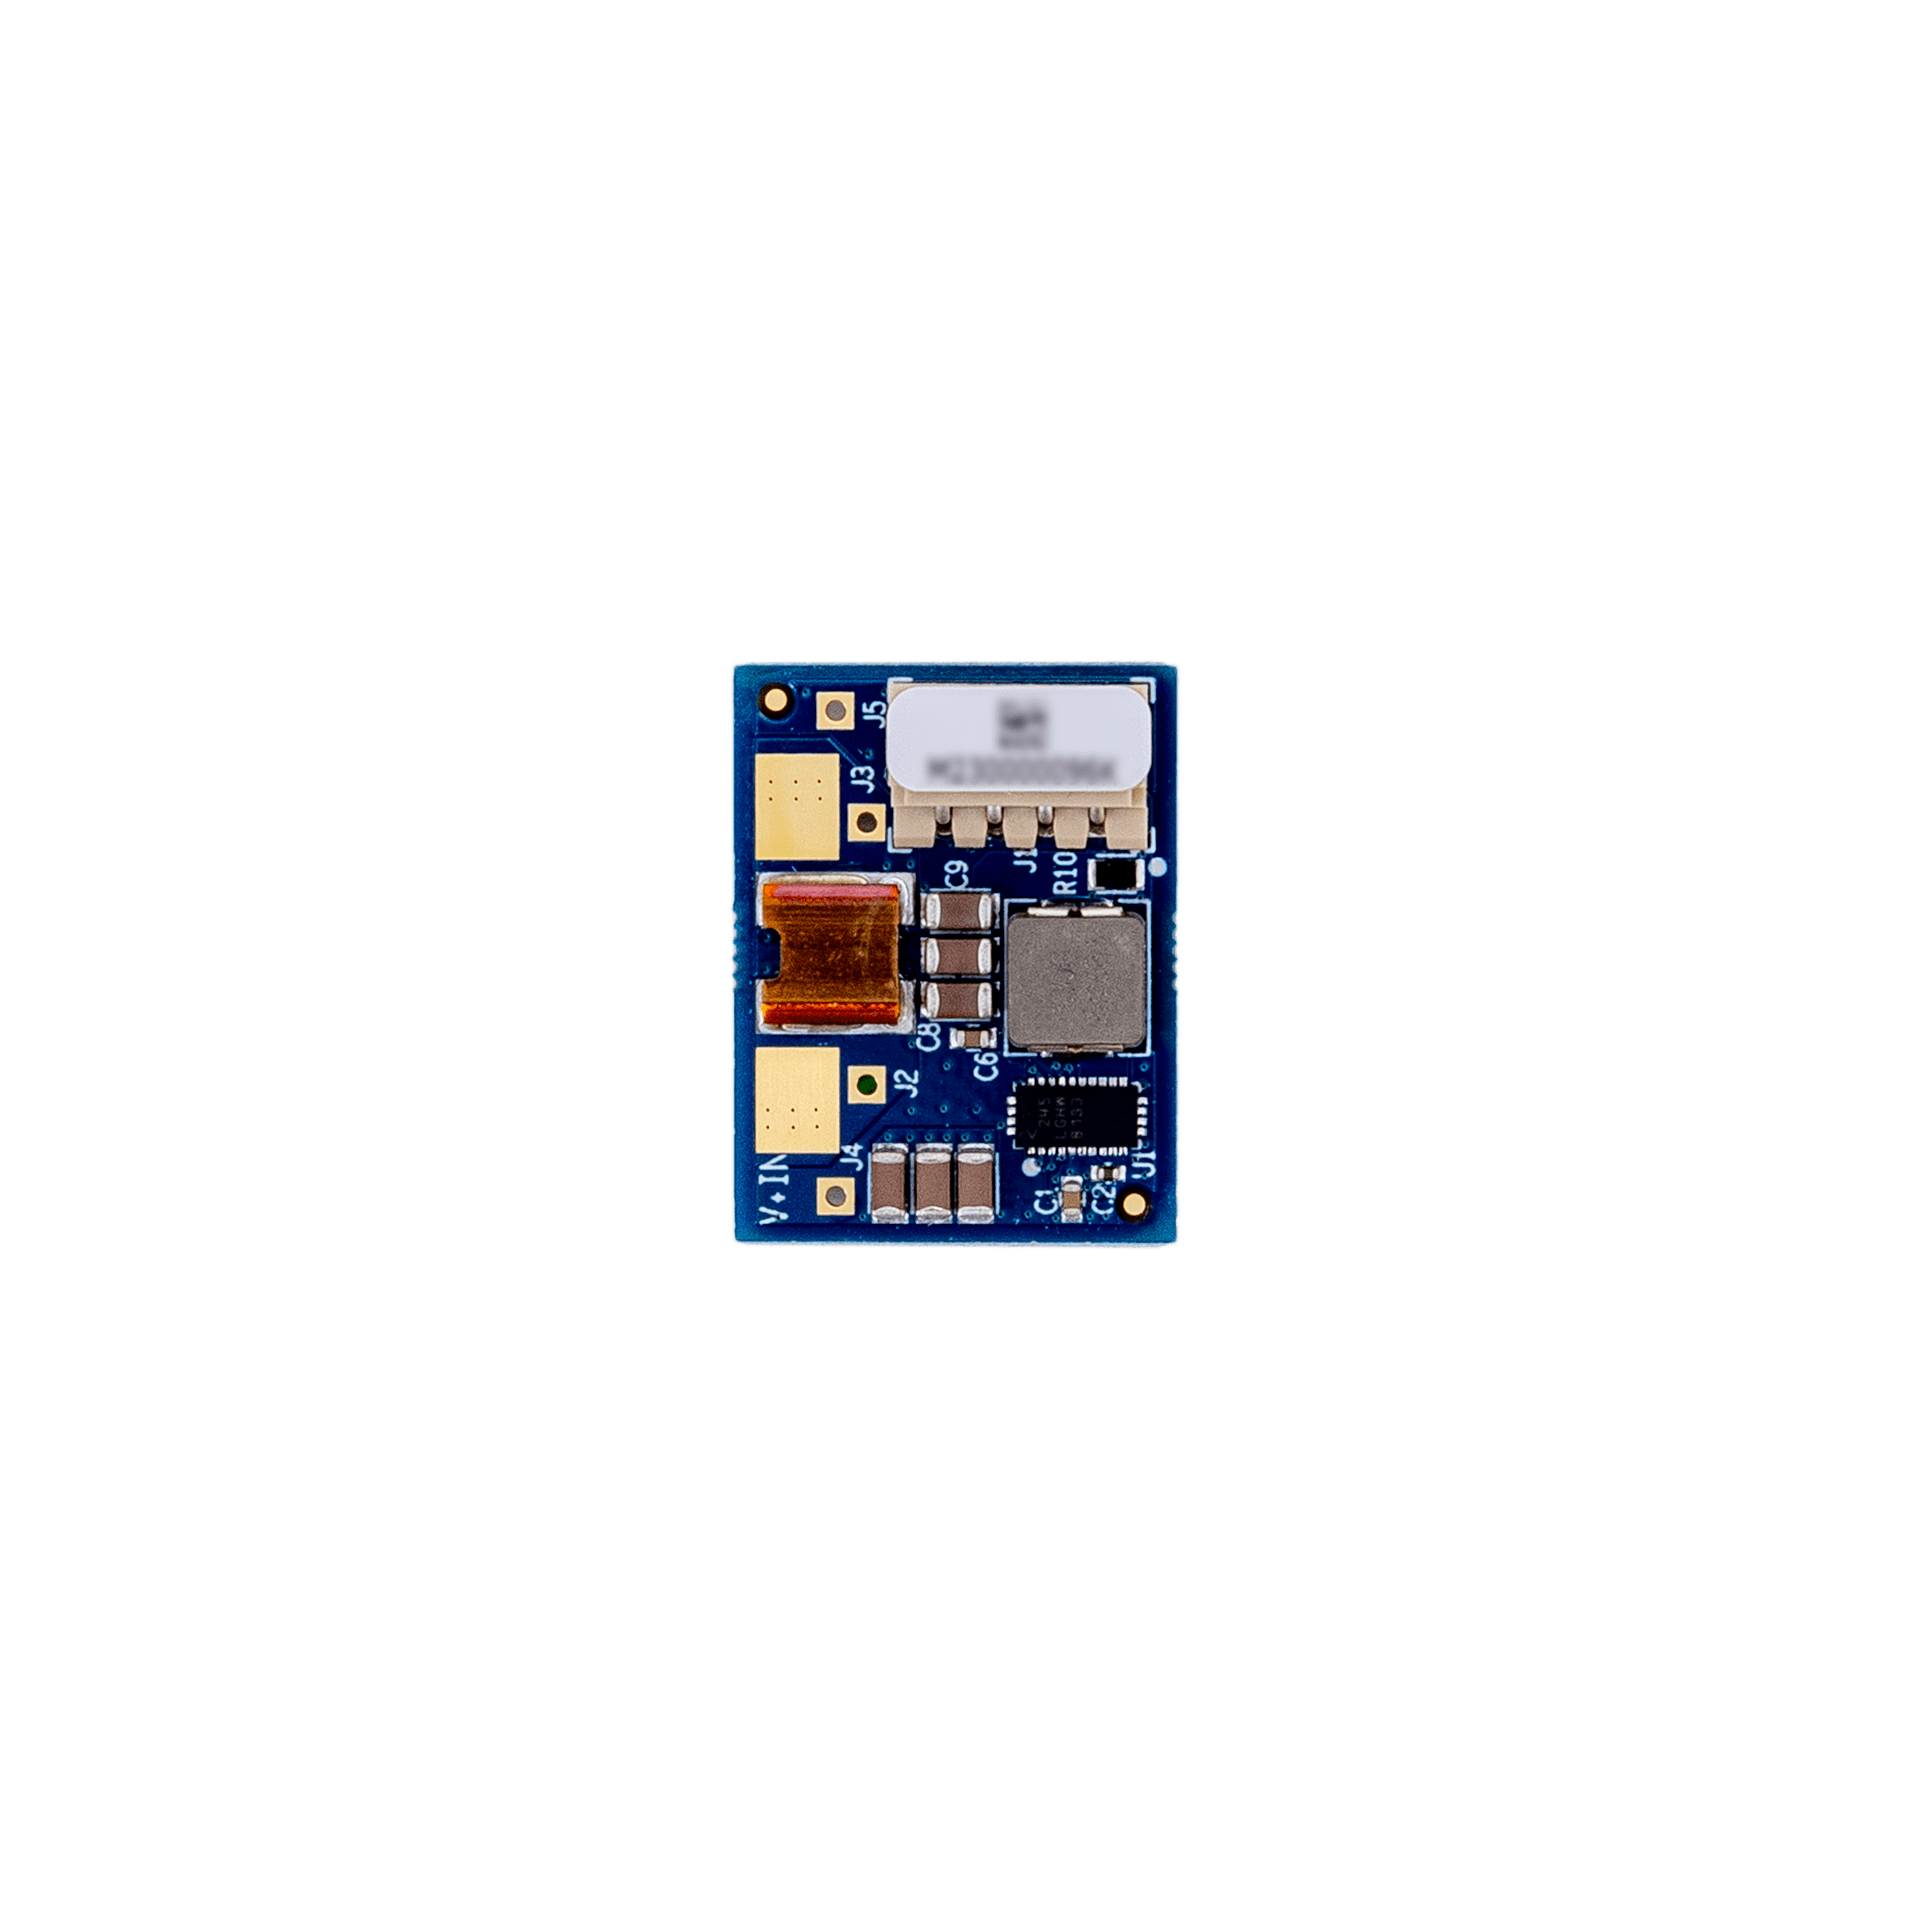 ModalAI, Inc. Accessory Power Module (No Power Cables) Cable Power Module for Companion Computer, Flight Controller and ESCs (Drones and Robots) (MDK-M0041)